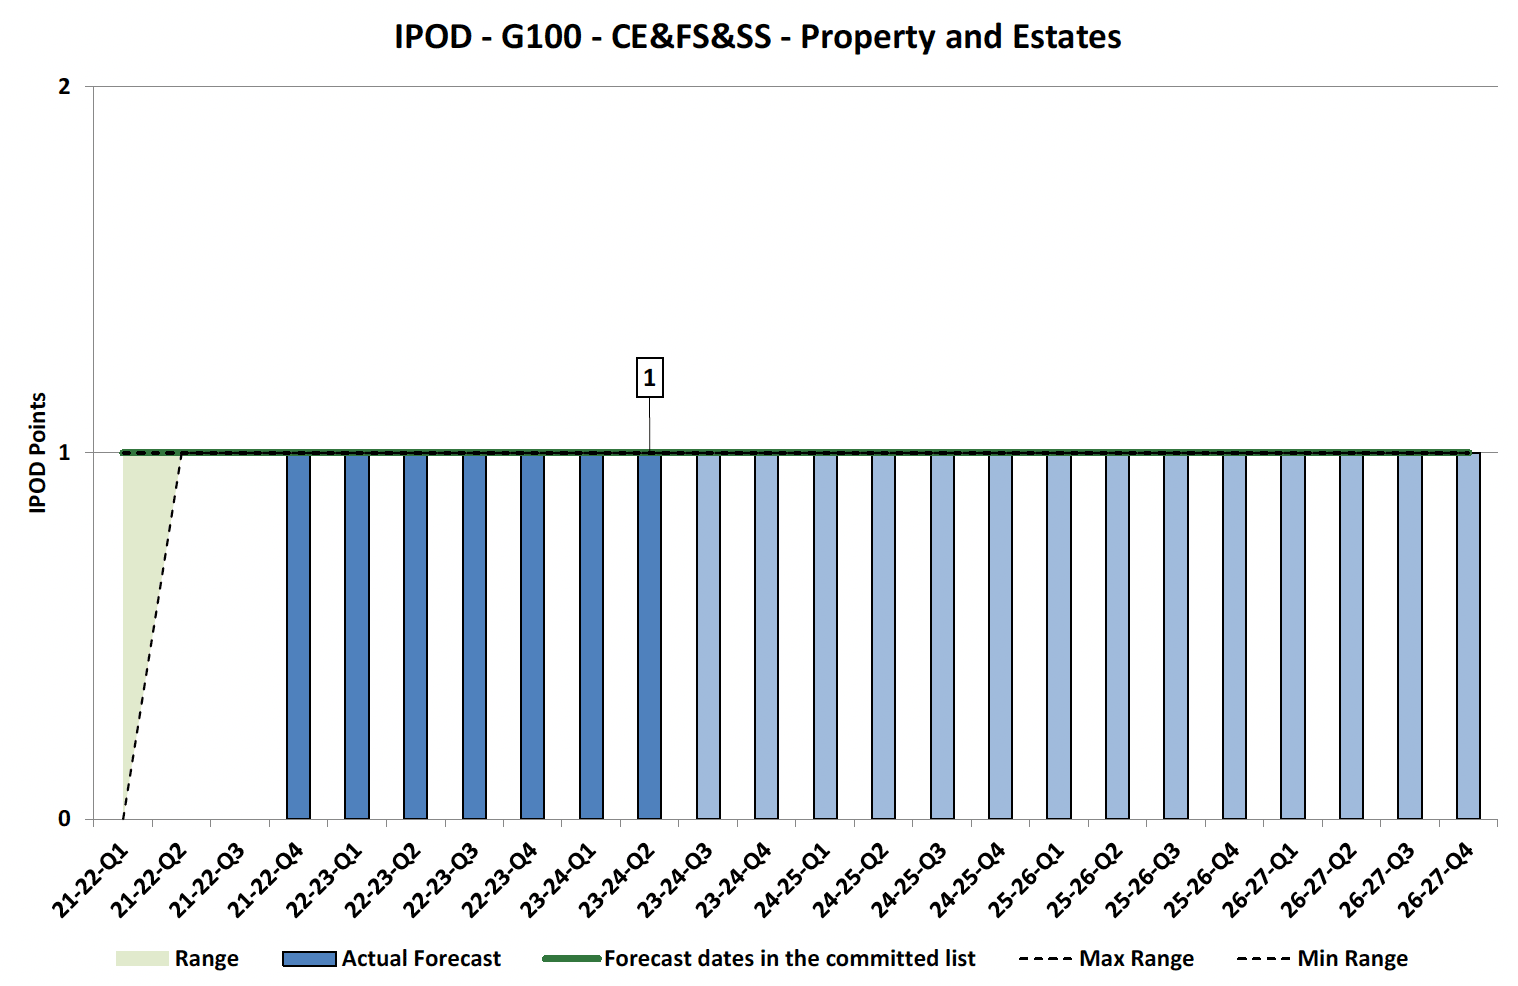 Chart showing IPOD points achieved or forecast for Project Acceptance milestone against target range for Property and Estates Projects in CE&FS&SS Portfolio